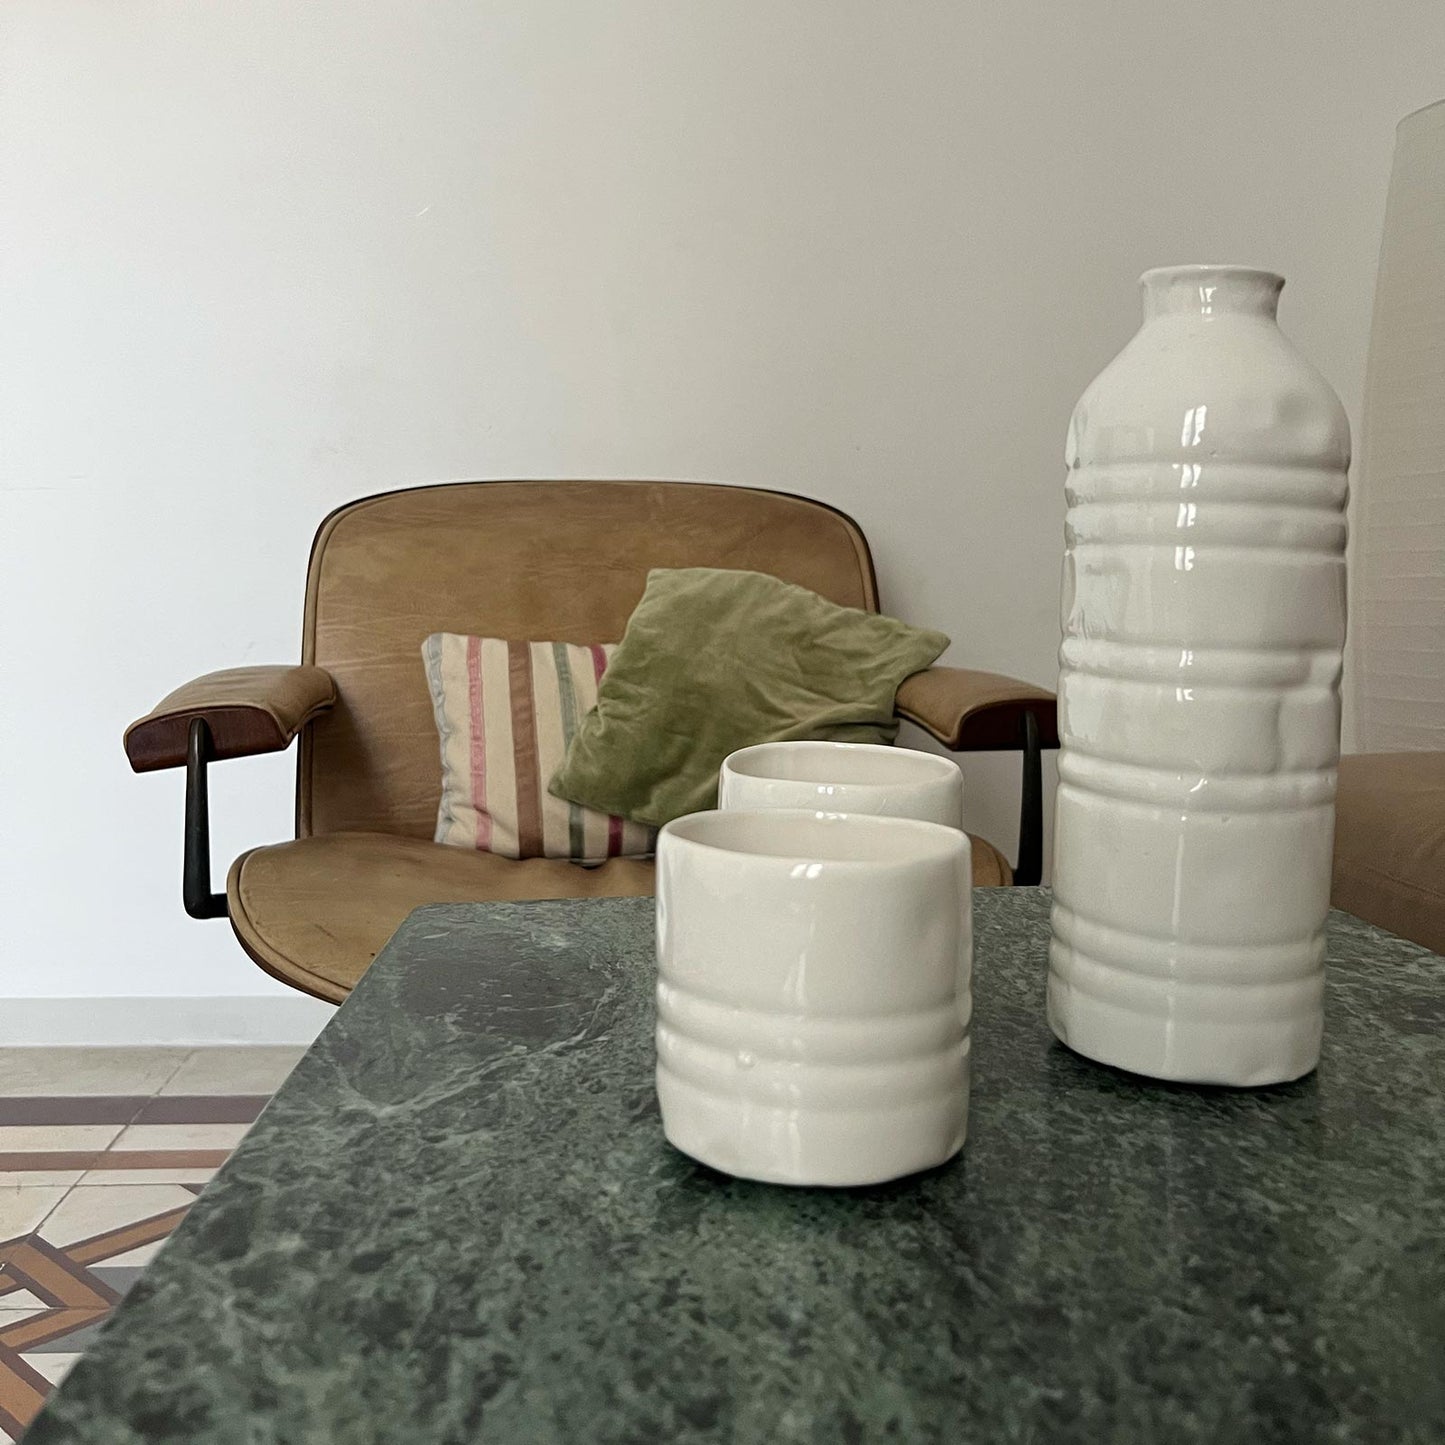 Set of Bottle and Cups